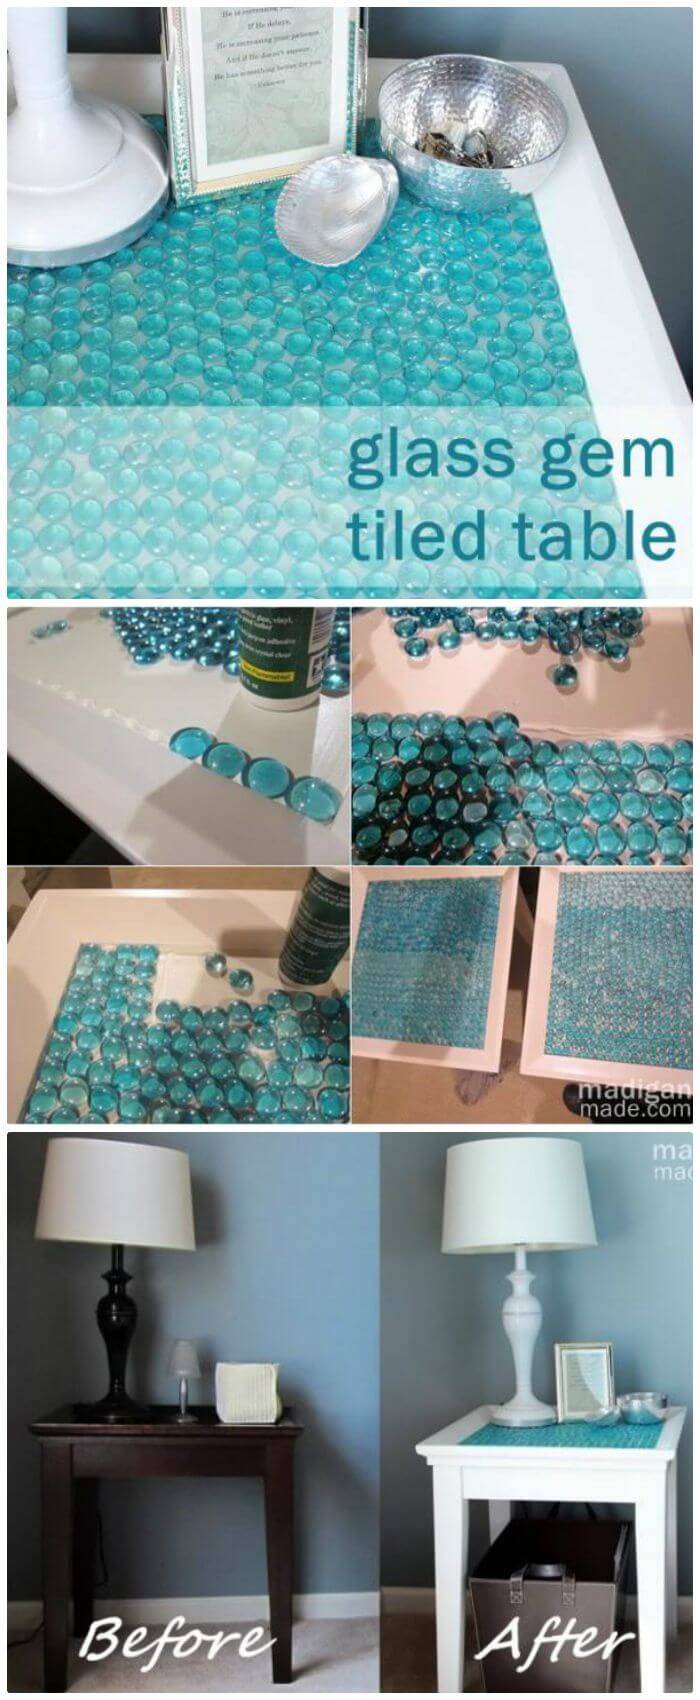 DIY Tile A Table With Glass Gems - Dollar Store Craft 